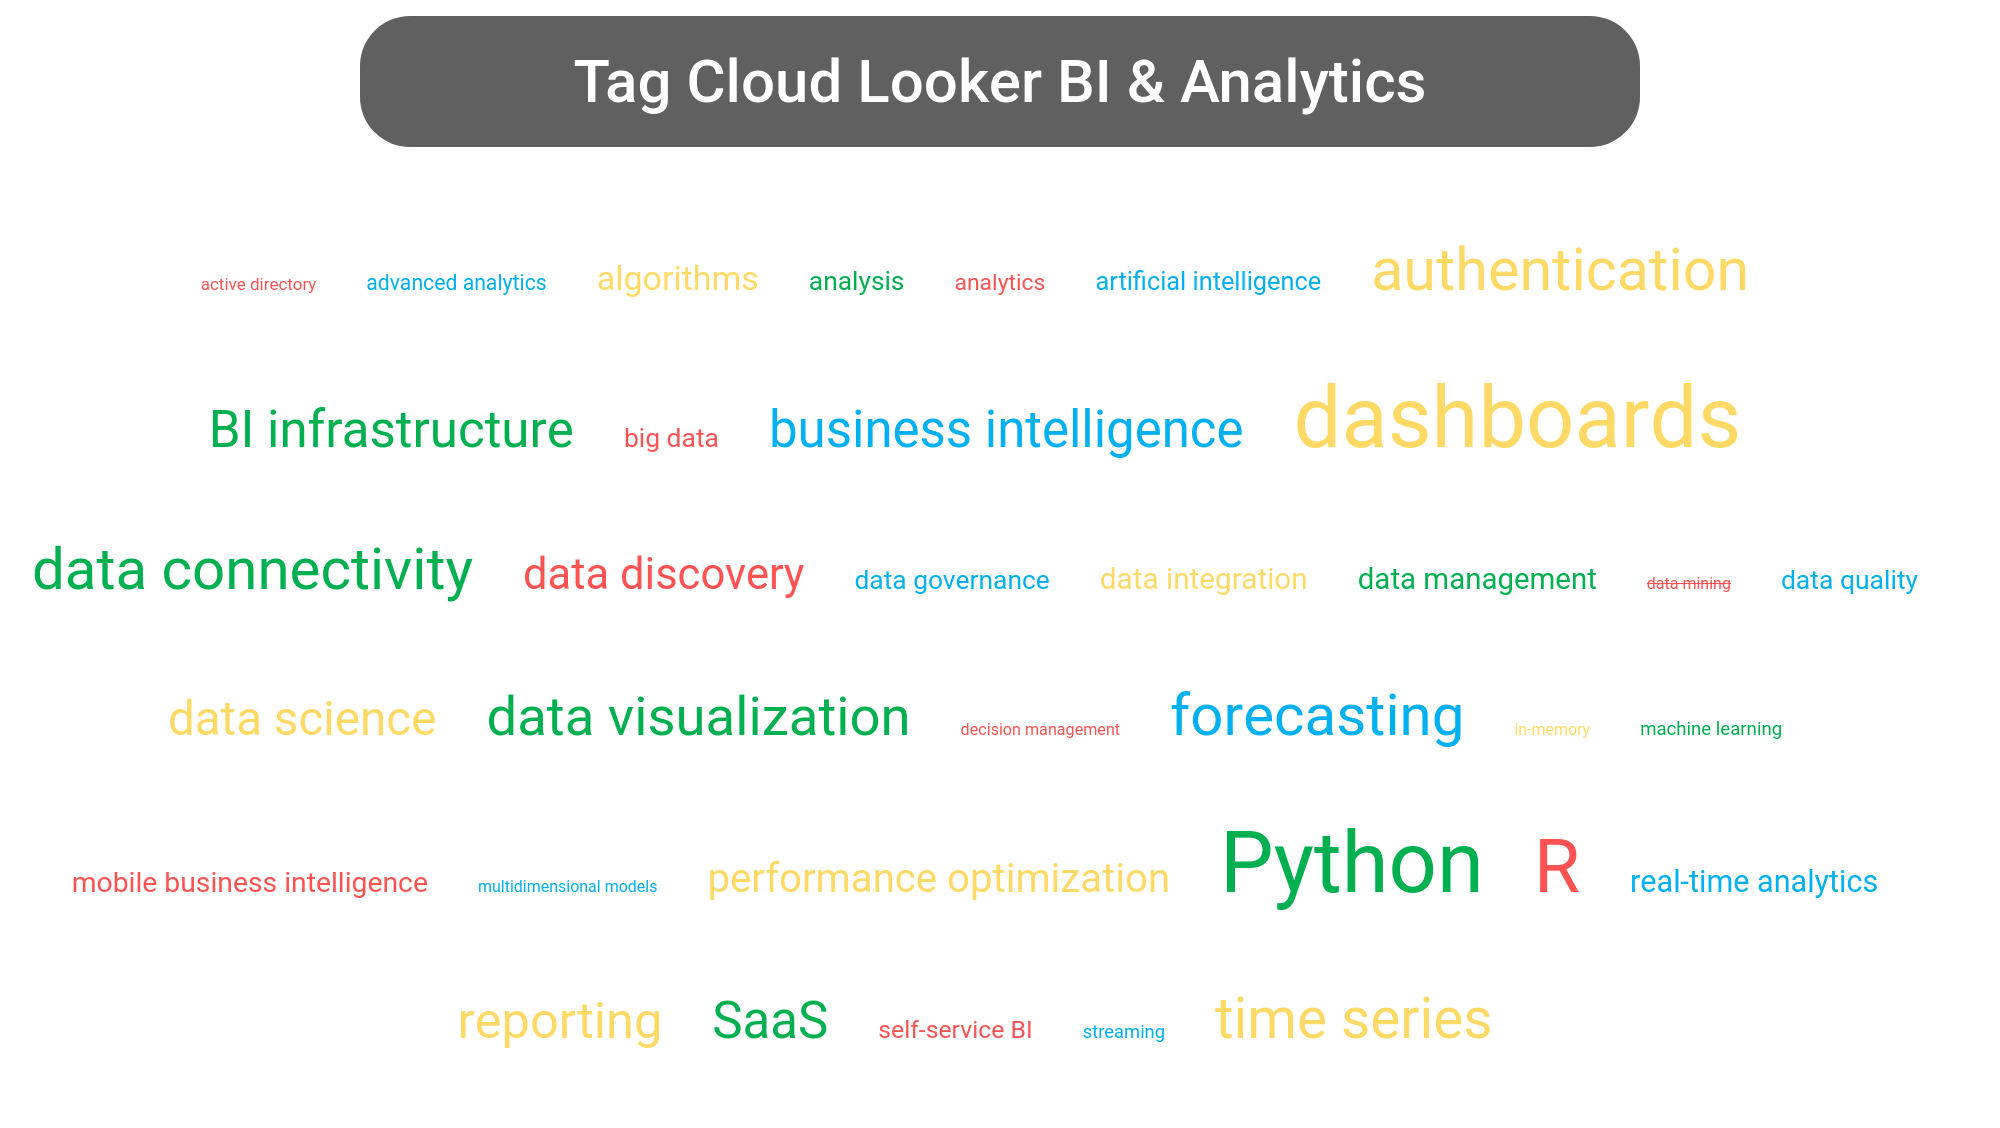 Tag cloud of the Looker Data Analytics tools.